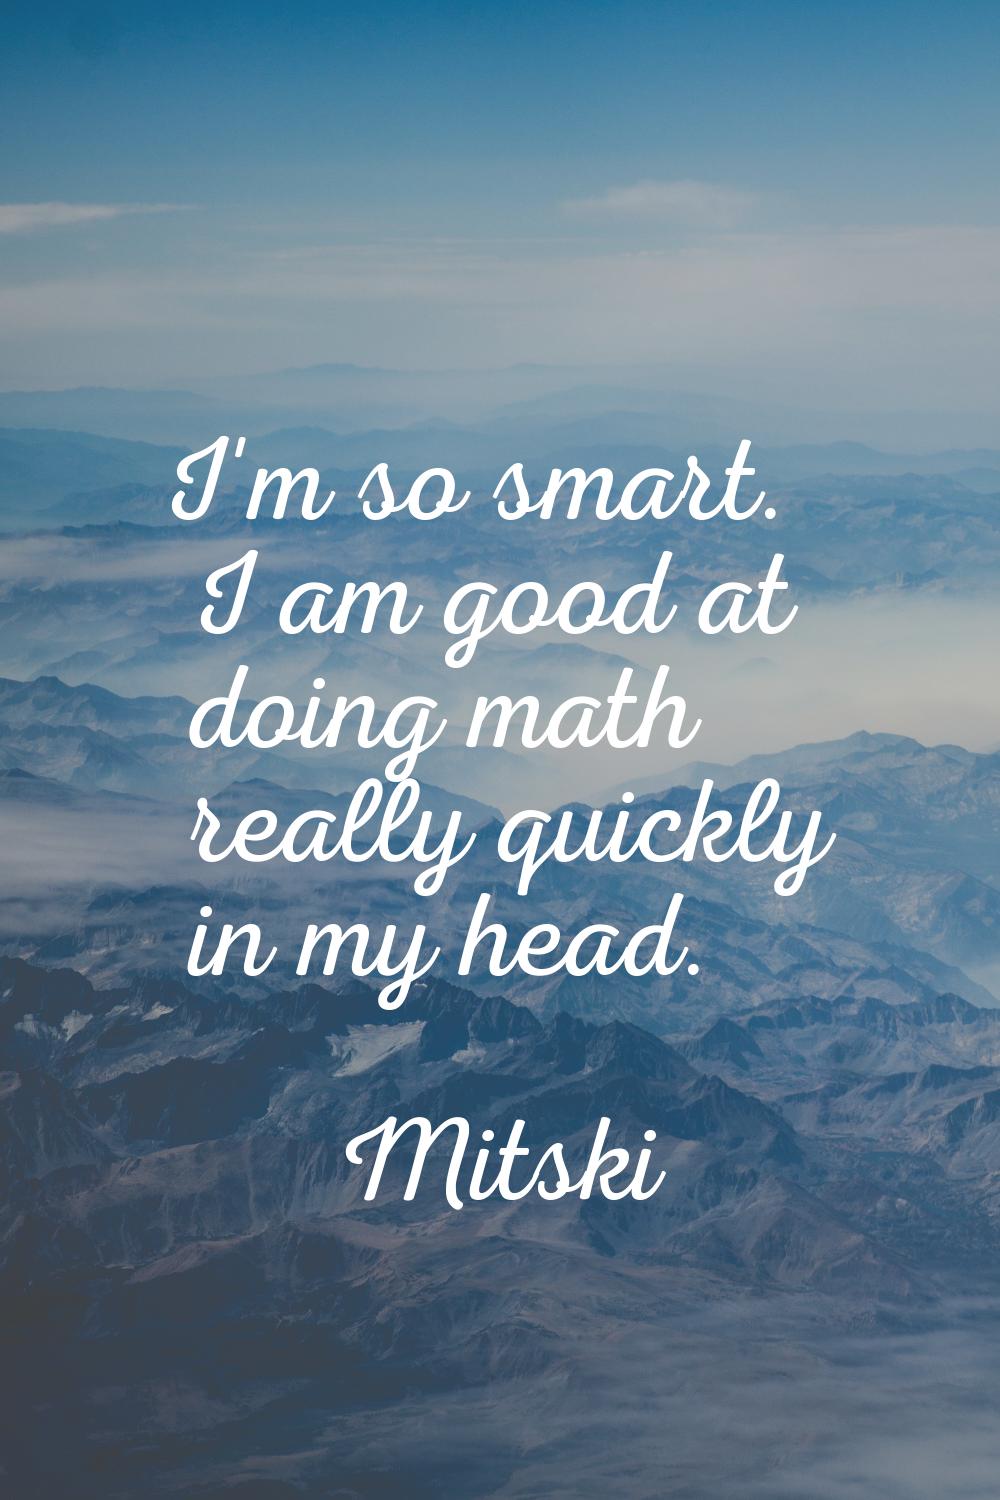 I'm so smart. I am good at doing math really quickly in my head.